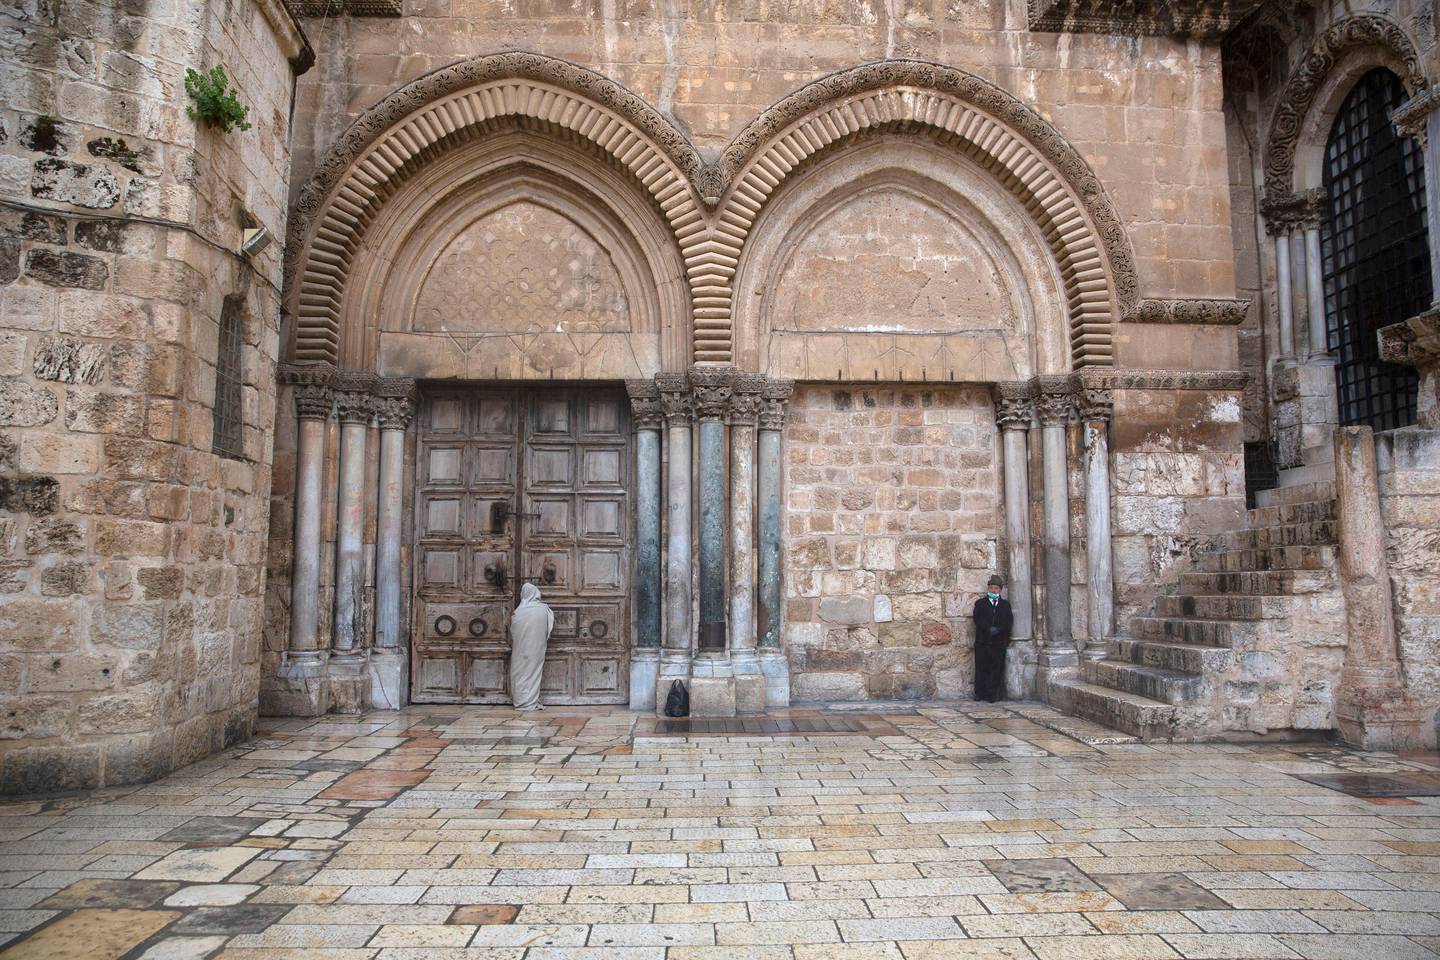 A Christian stands at the closed door of the Church of the Holy Sepulchre, believed by many Christians to be the site of the crucifixion and burial of Jesus Christ, in Jerusalem, Friday, April 10, 2020. Christians are commemorating Jesus' crucifixion without the solemn church services or emotional processions of past years, marking Good Friday in a world locked down by the coronavirus pandemic. (AP Photo/Sebastian Scheiner)